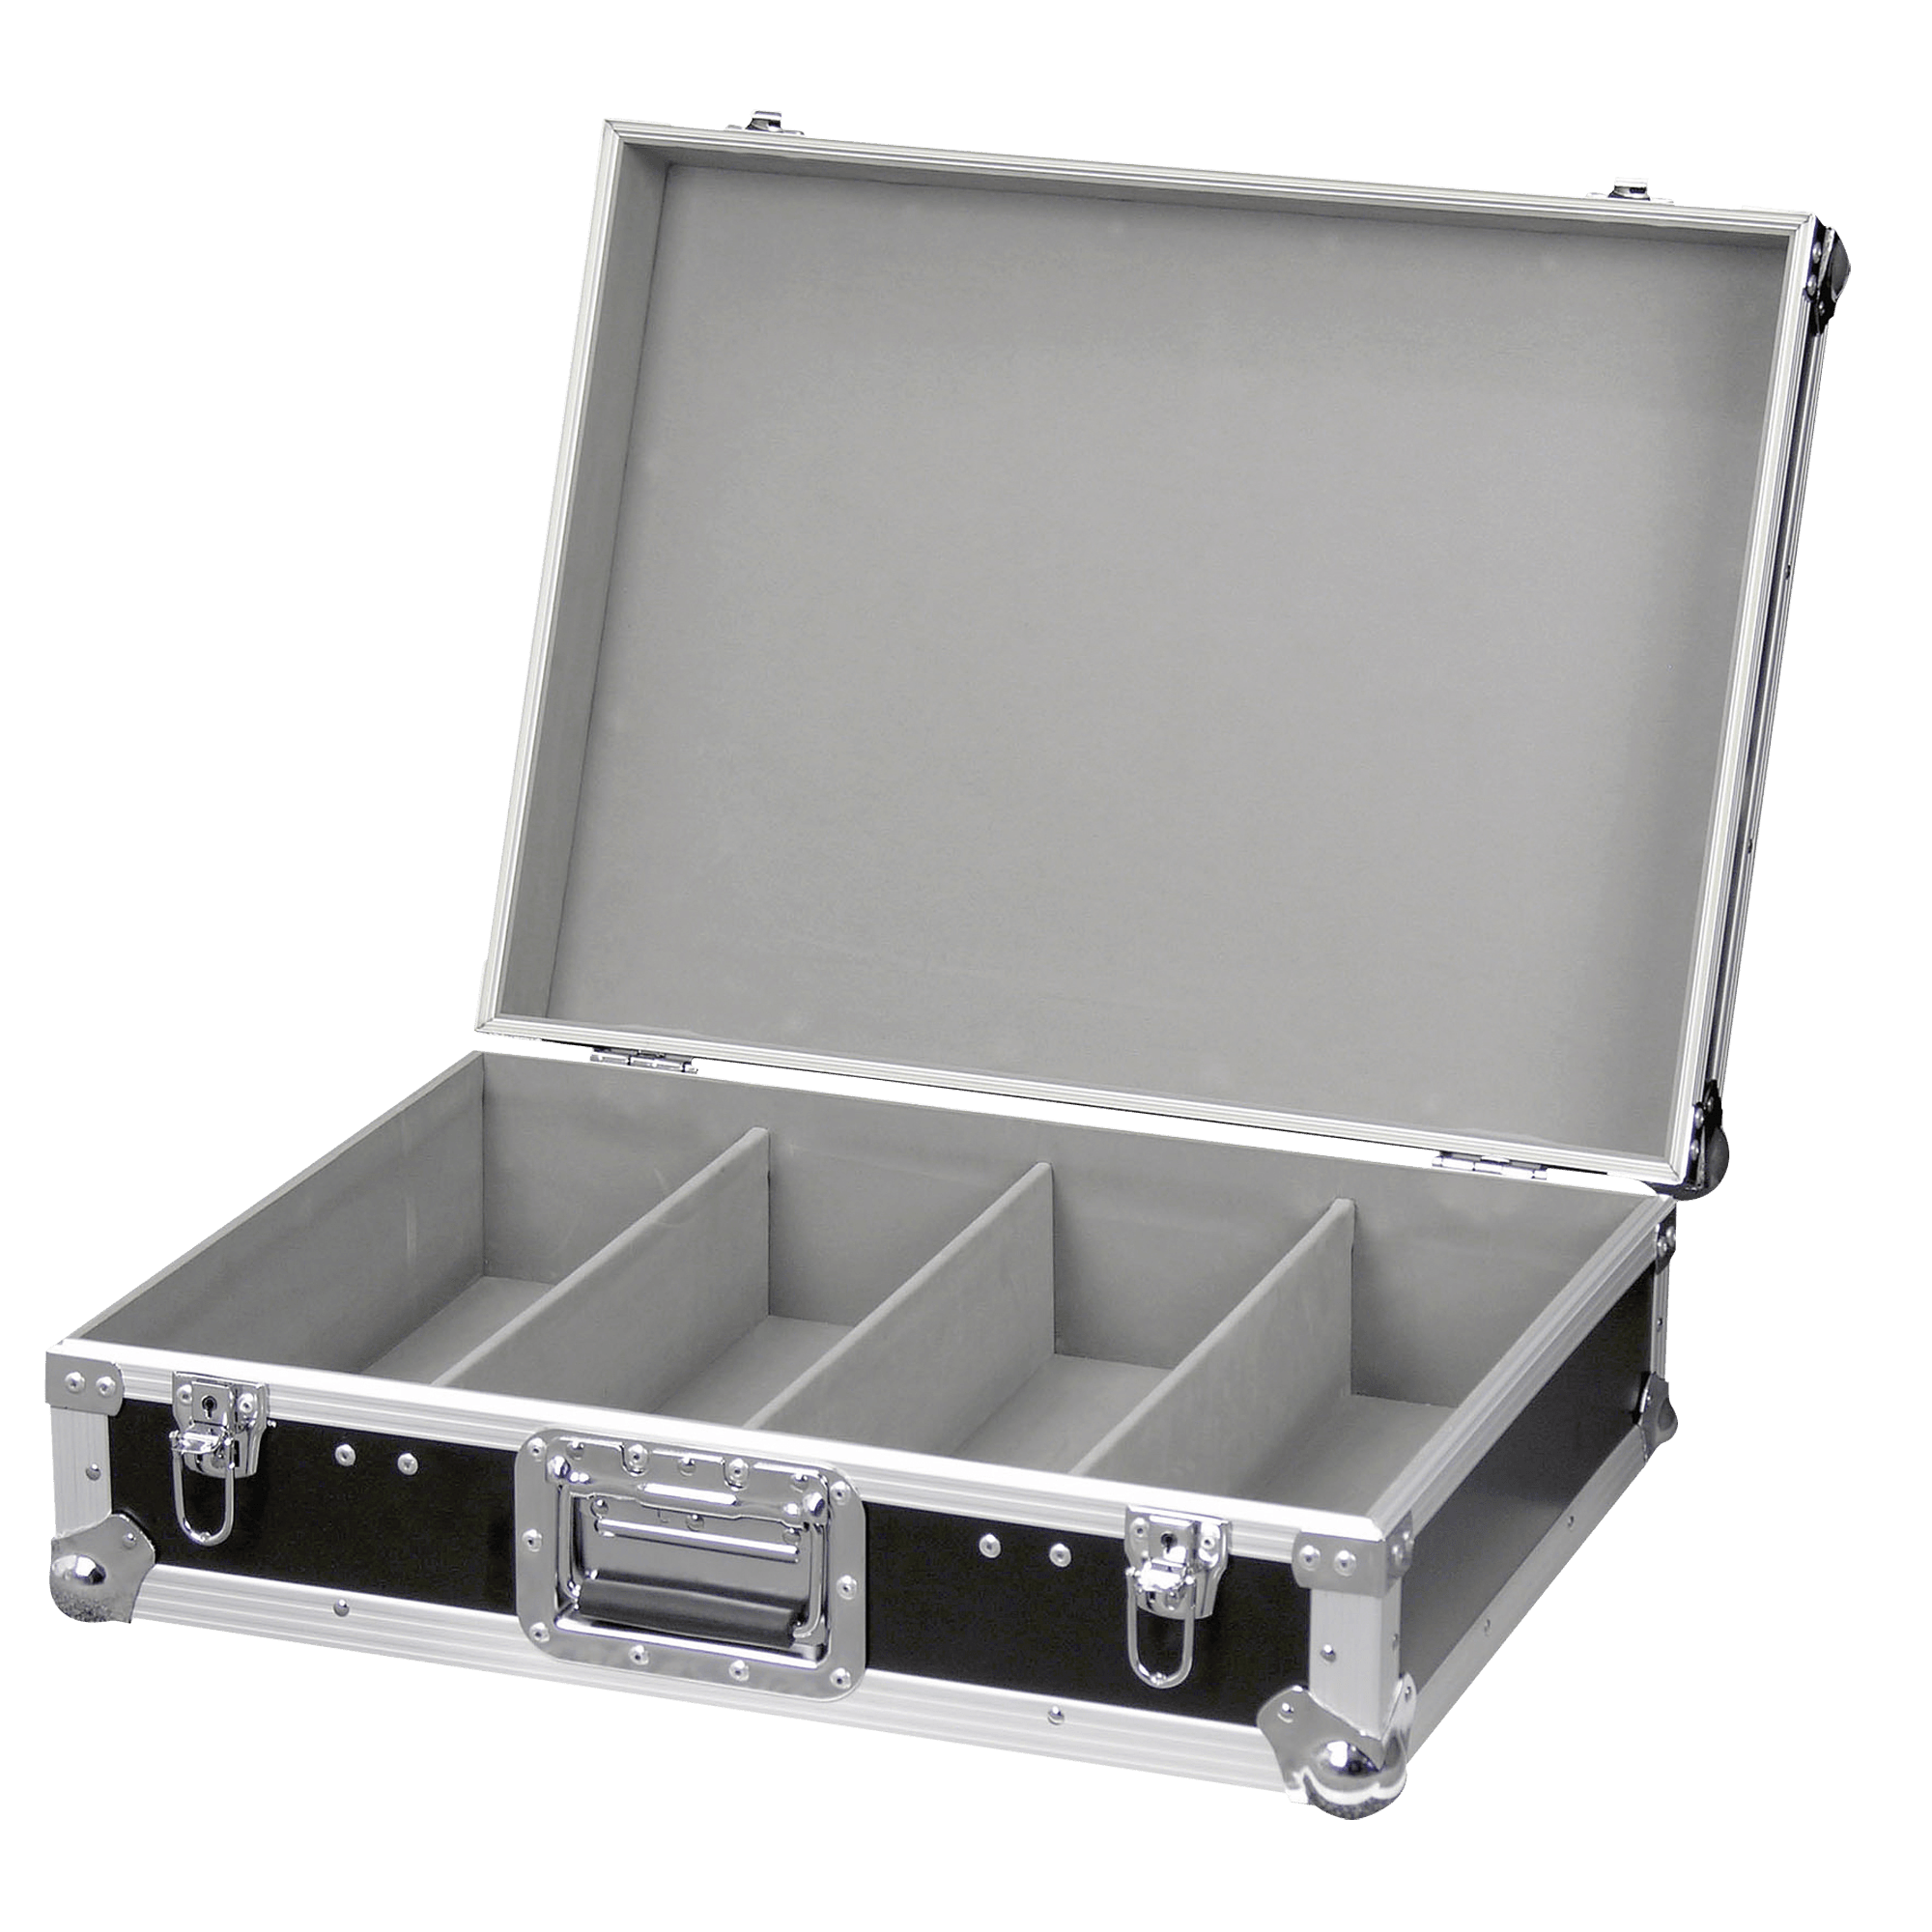 Showgear Flight Case for 170 CDs With 4 compartments - DY Pro Audio